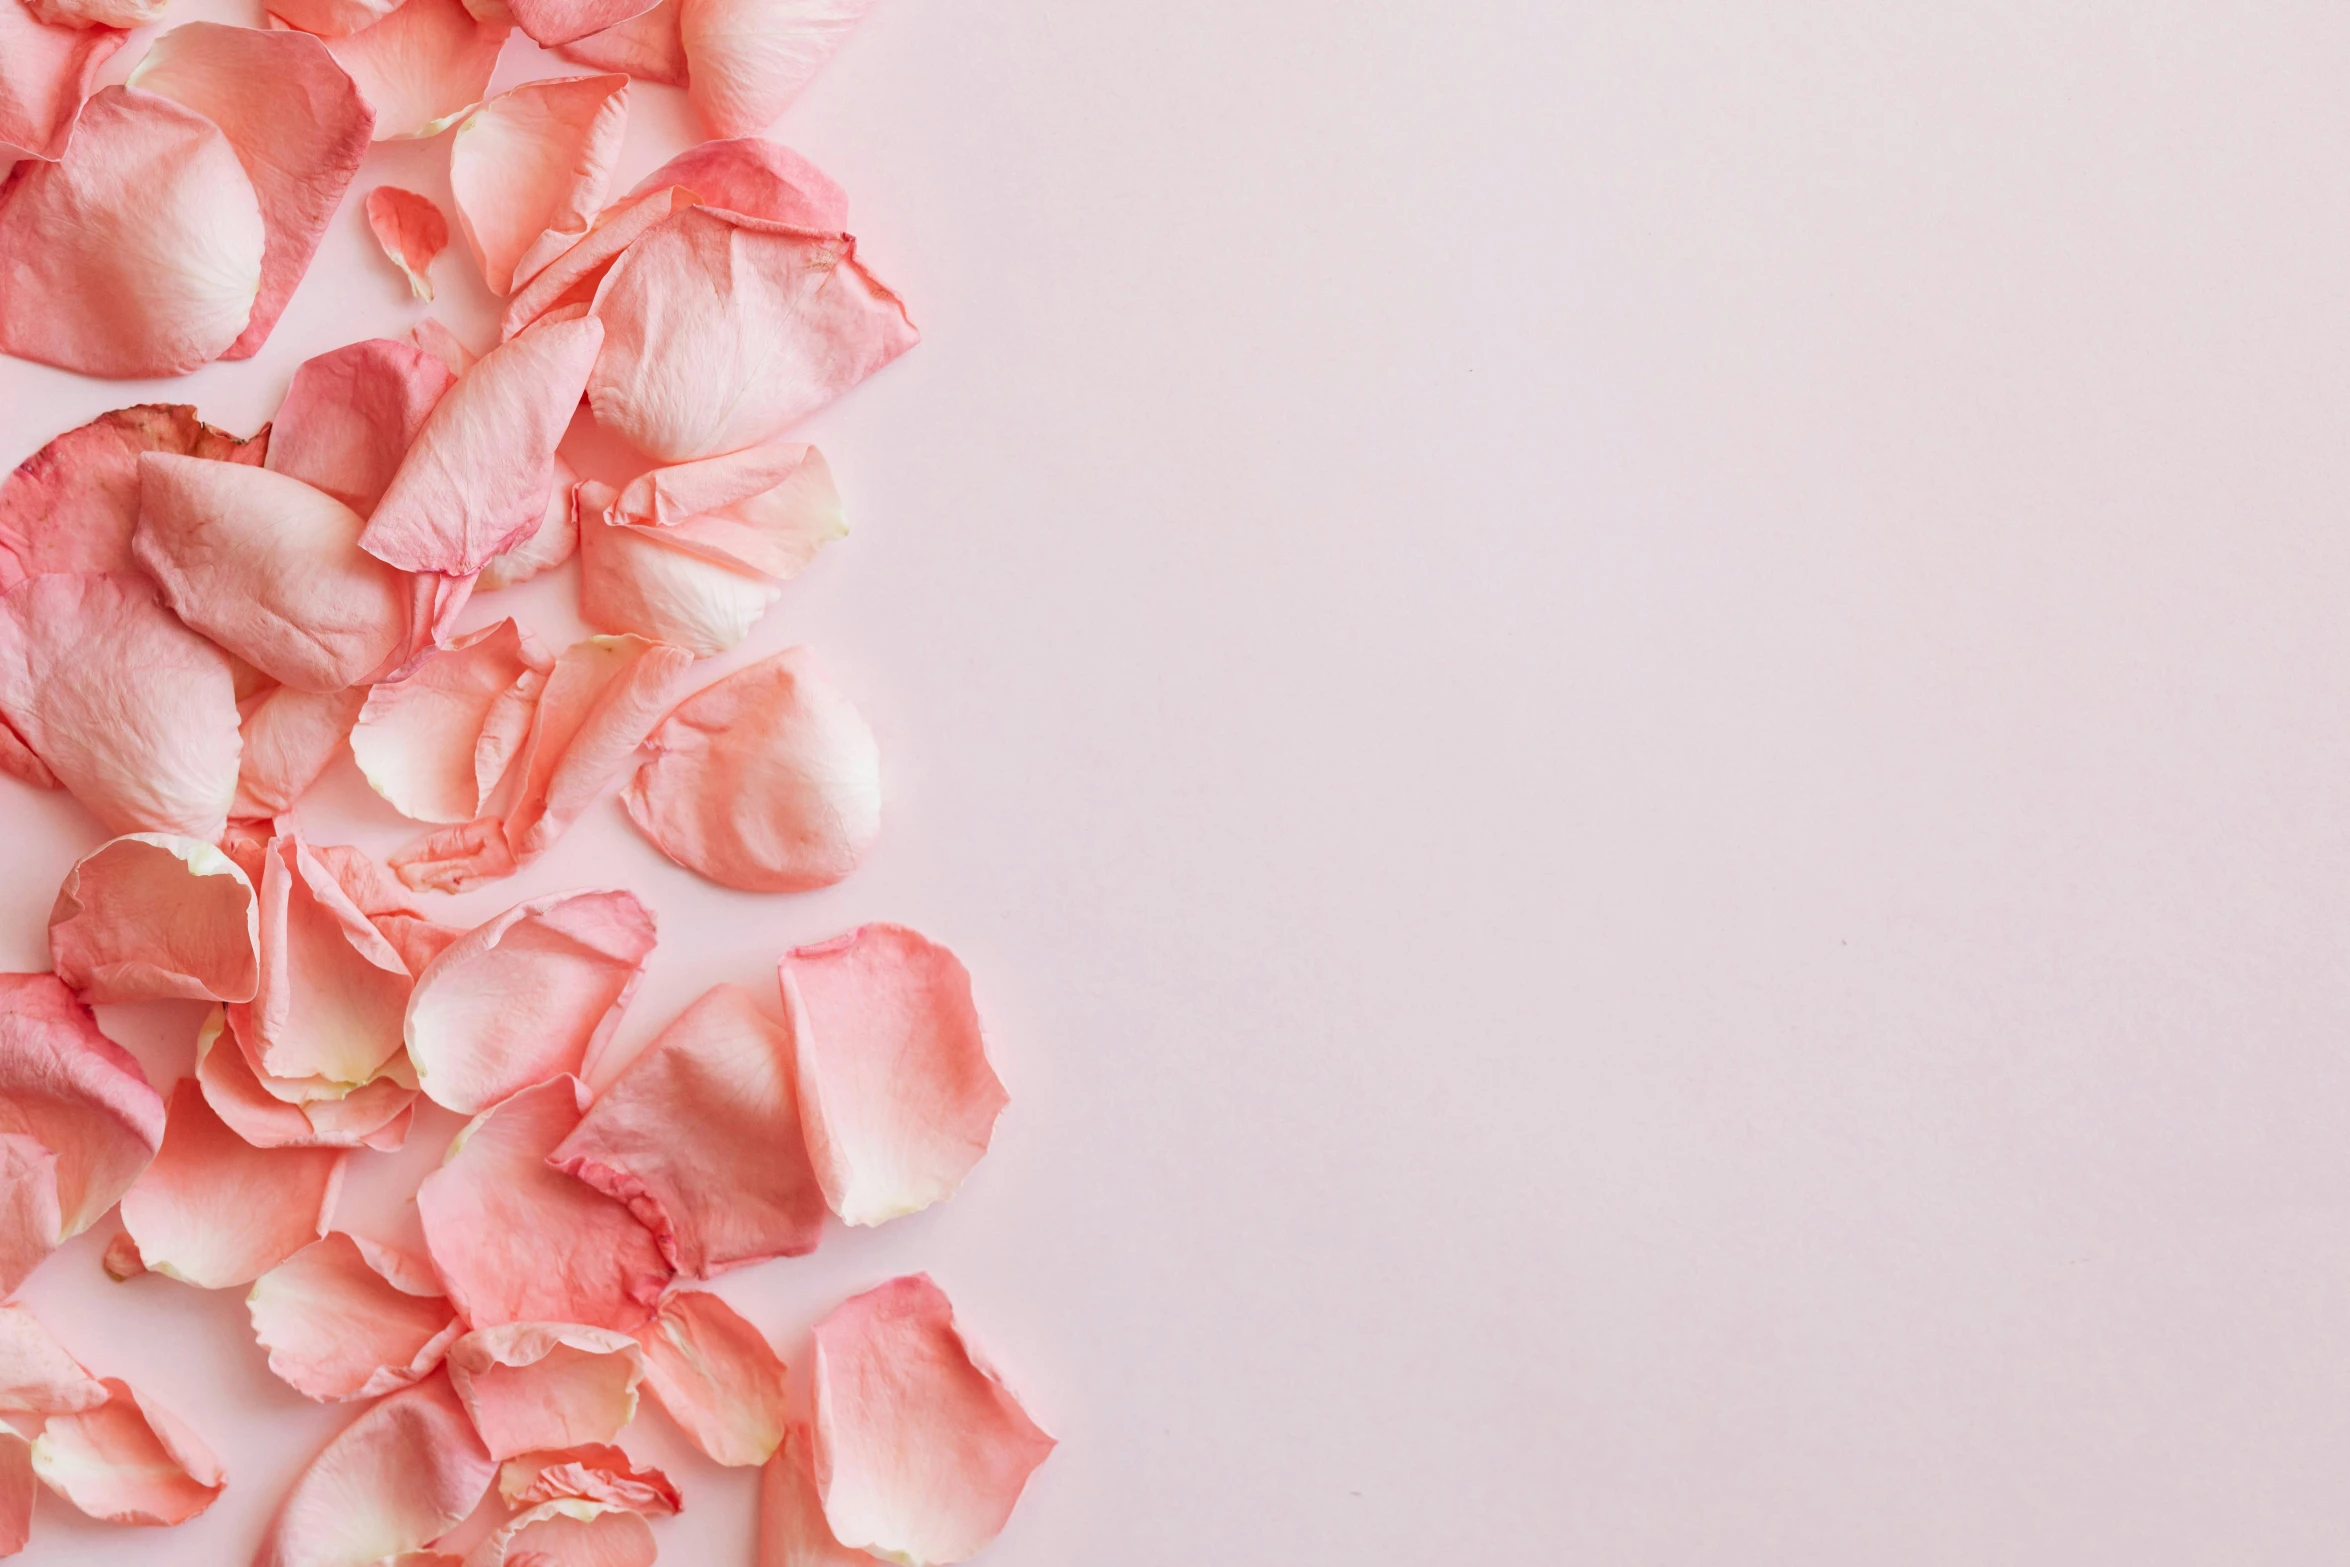 a close up of pink petals on a white surface, an album cover, trending on pexels, aestheticism, rose background, skincare, full body image, dull pink background